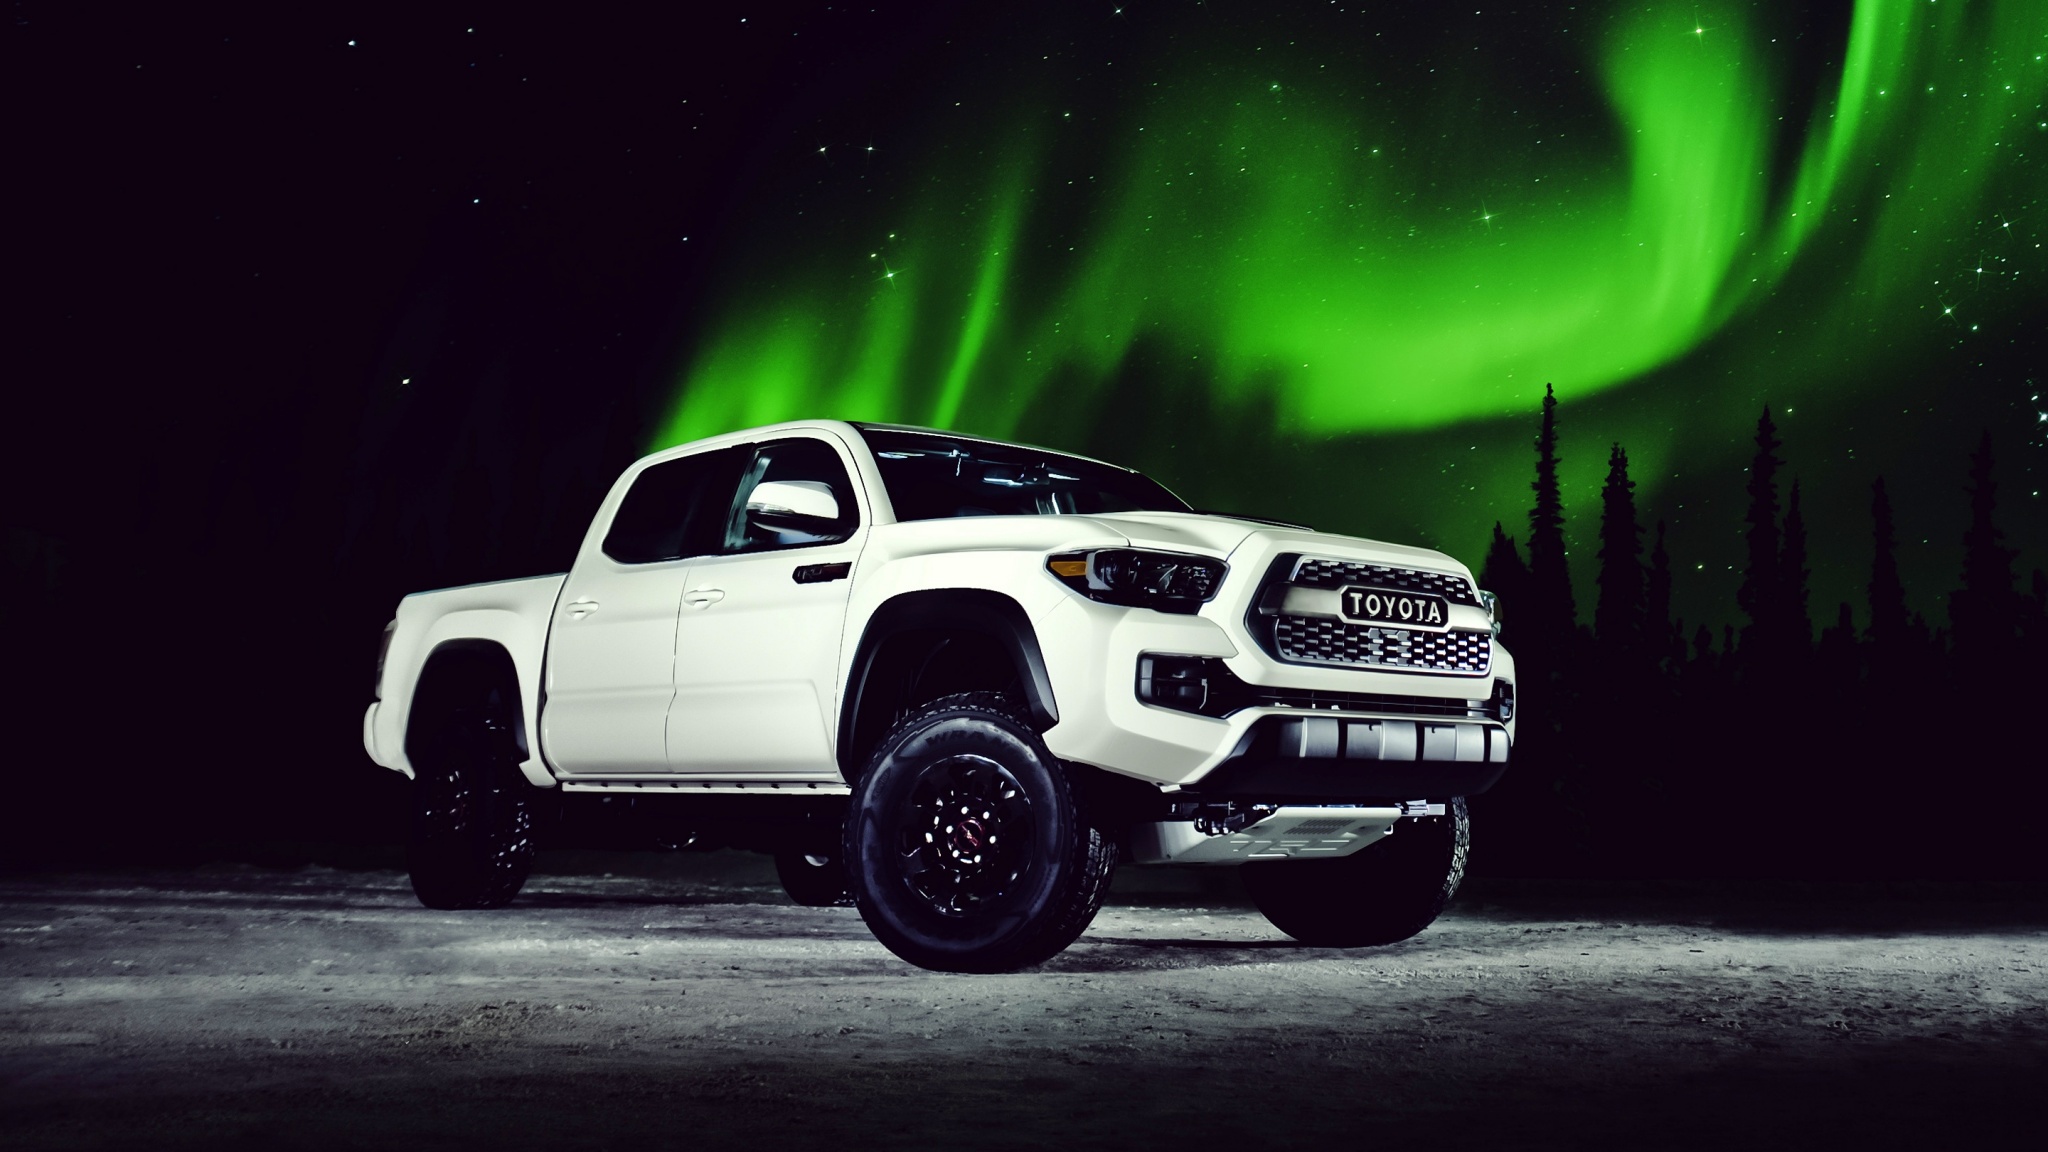 Toyota Tacoma TRD Pro 2017 Wallpapers   2048x1152   471779